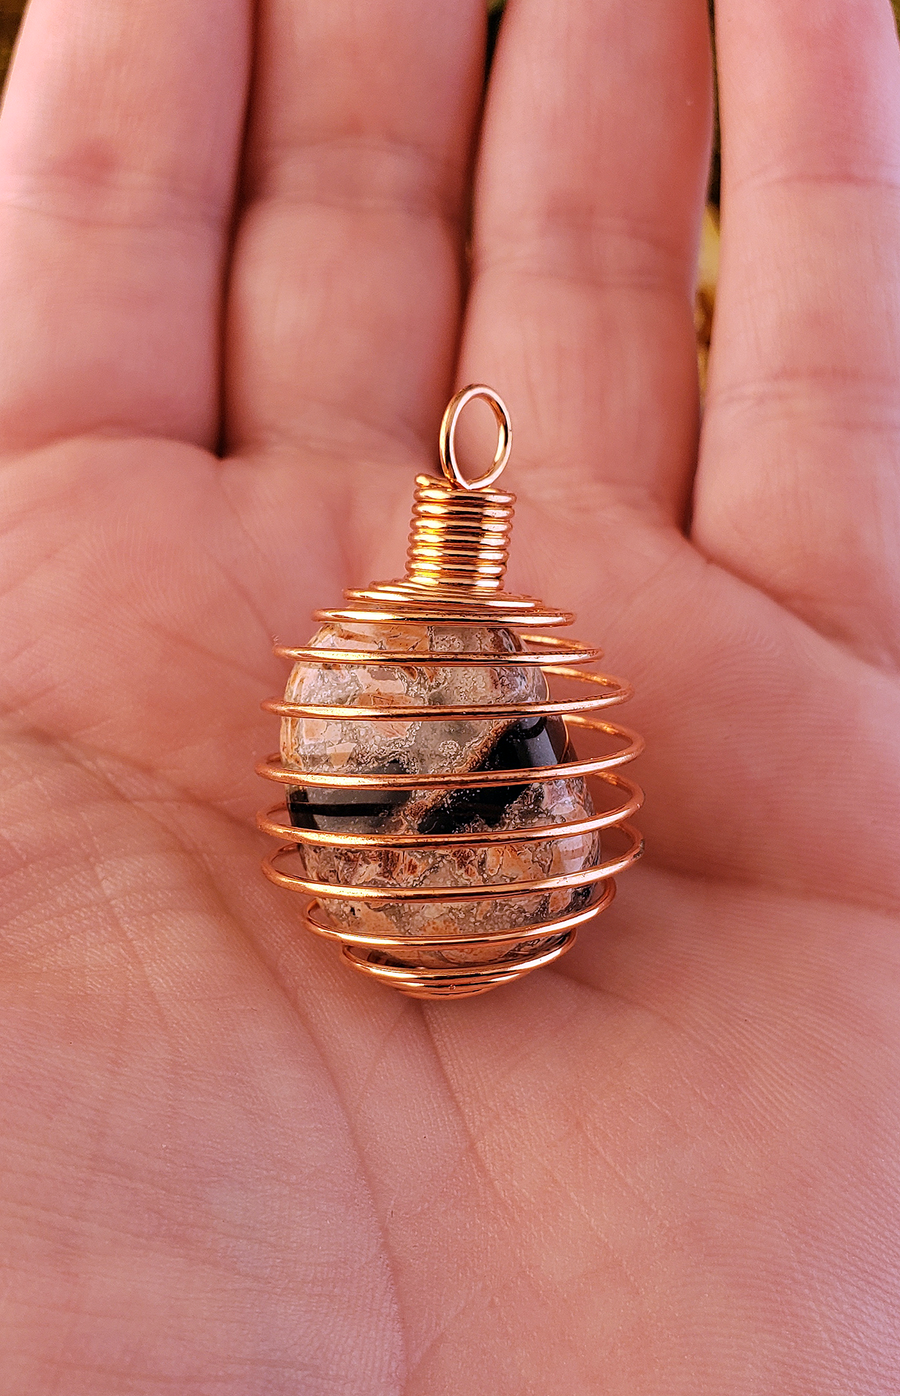 Copper-Colored Metal Spiral Cage Ornament Pendant - Perfect for Holding Gemstones or Orbs! - With Brecciated Jasper on Display!